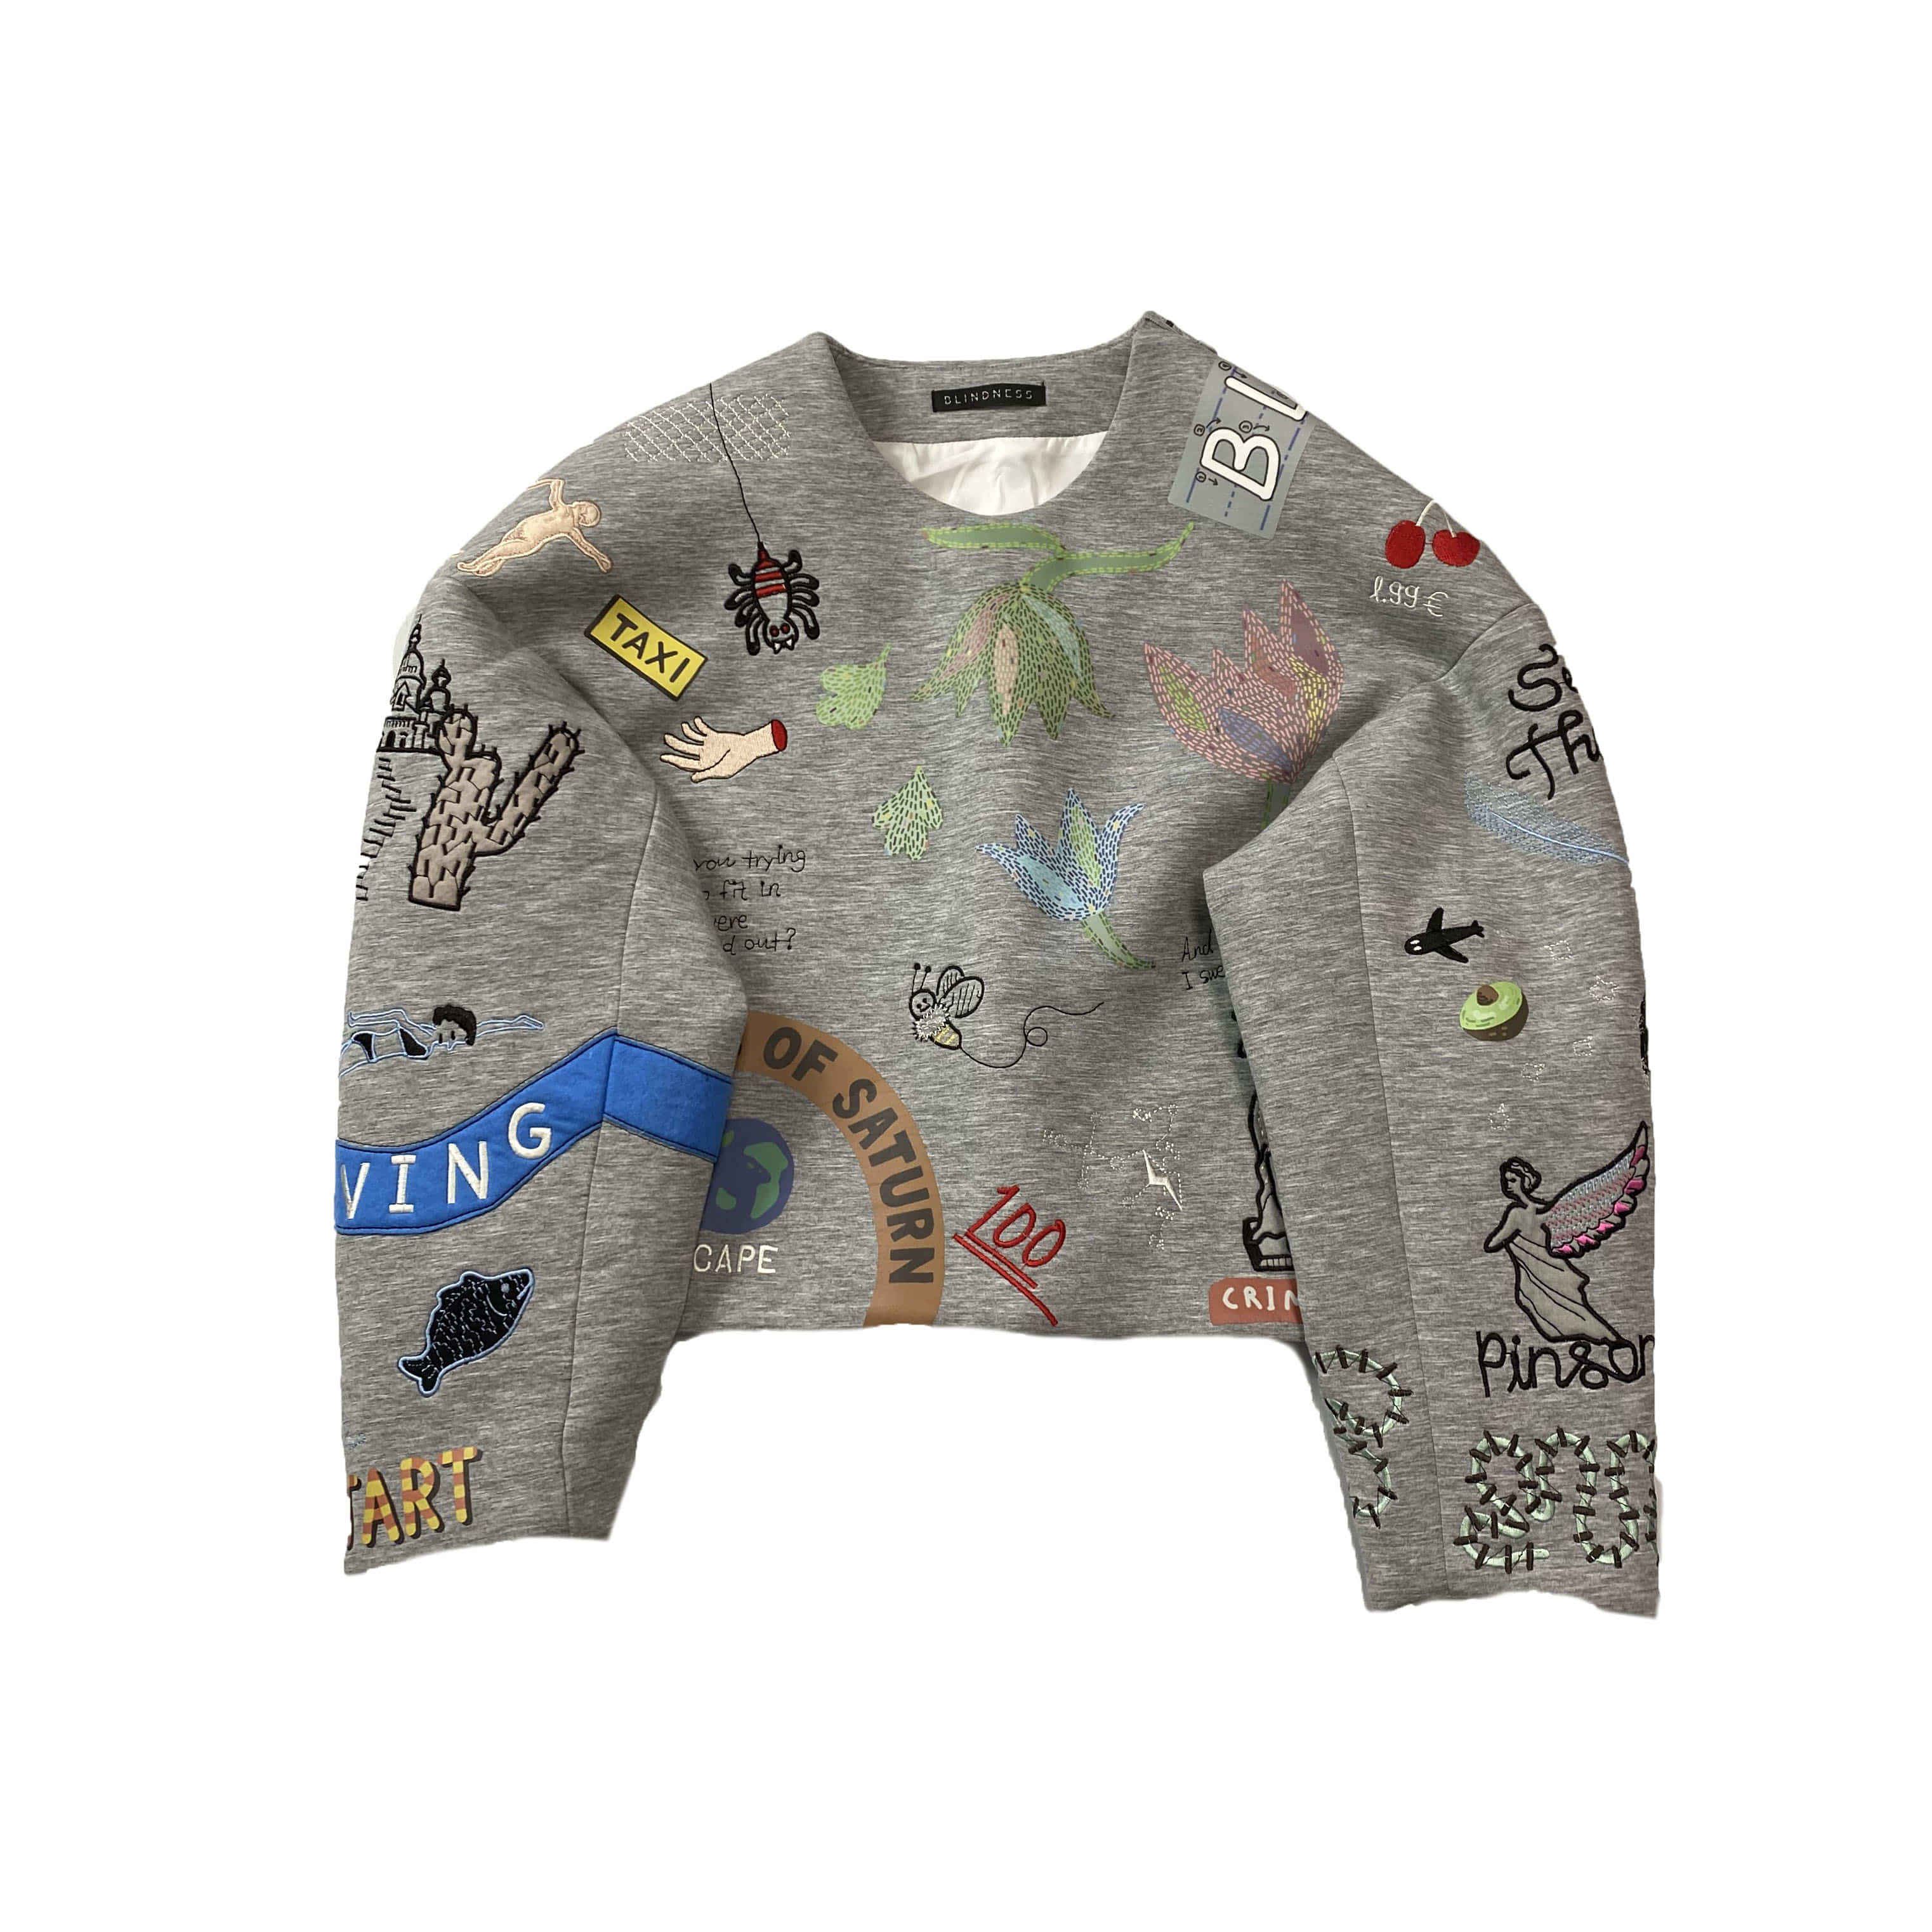 [Blindness] Stiched Sweater - Size O/S